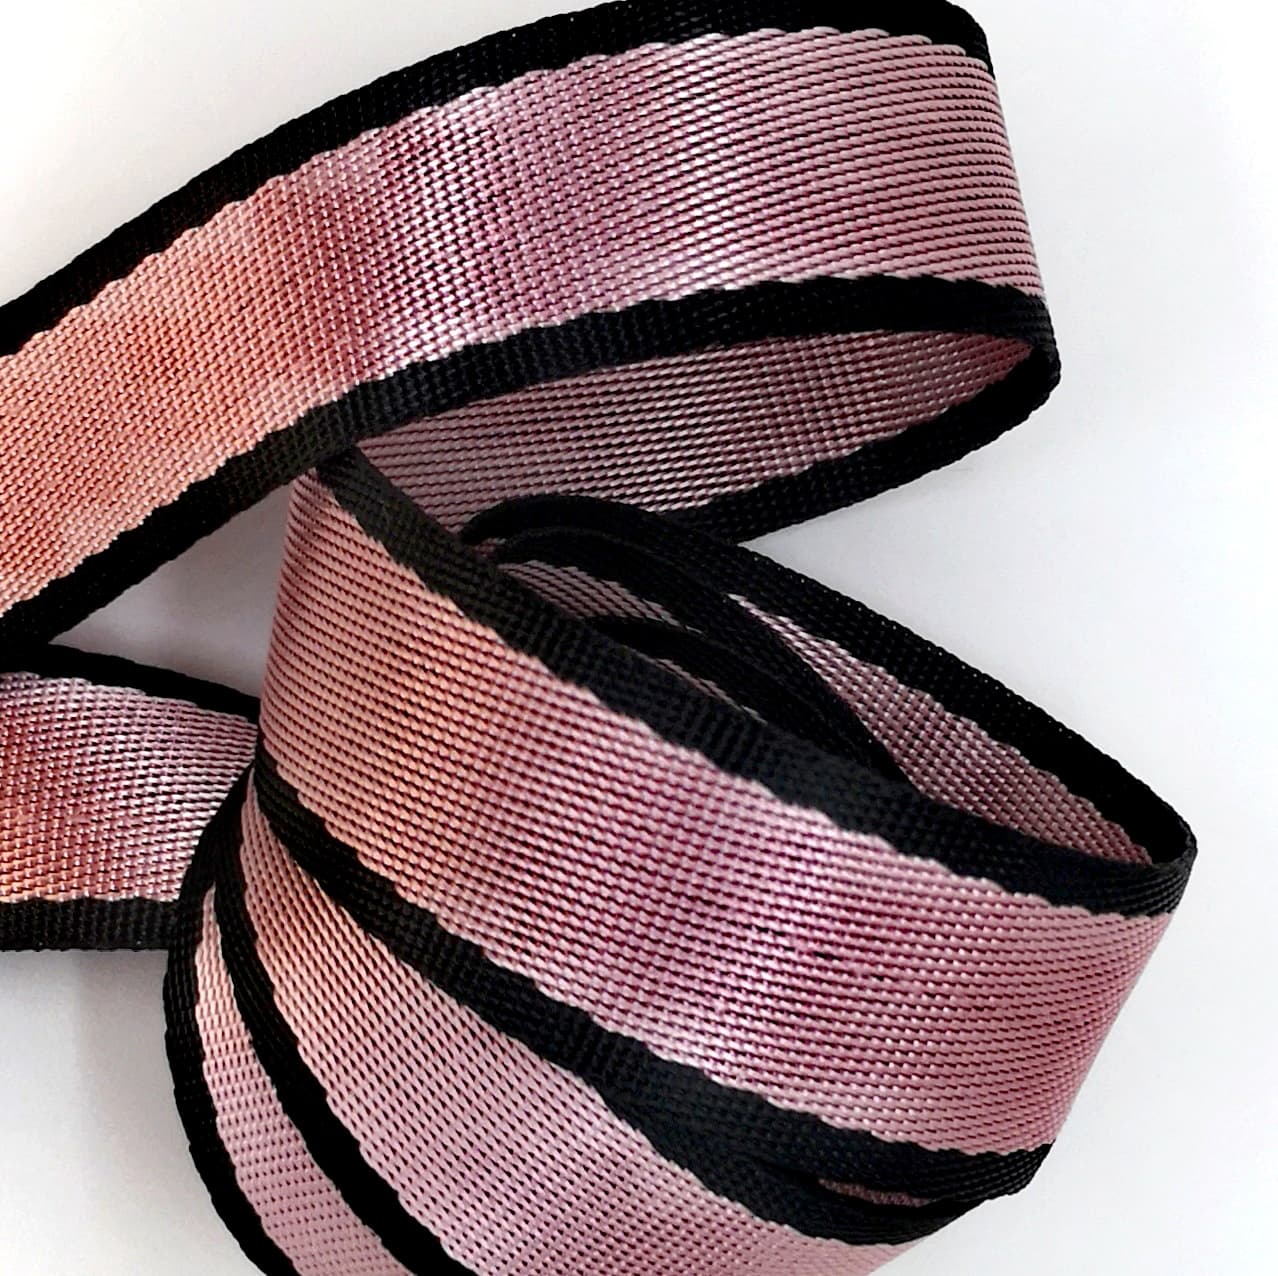 1" Wide Webbing Two Tone- Dusty Rose Pink and Black